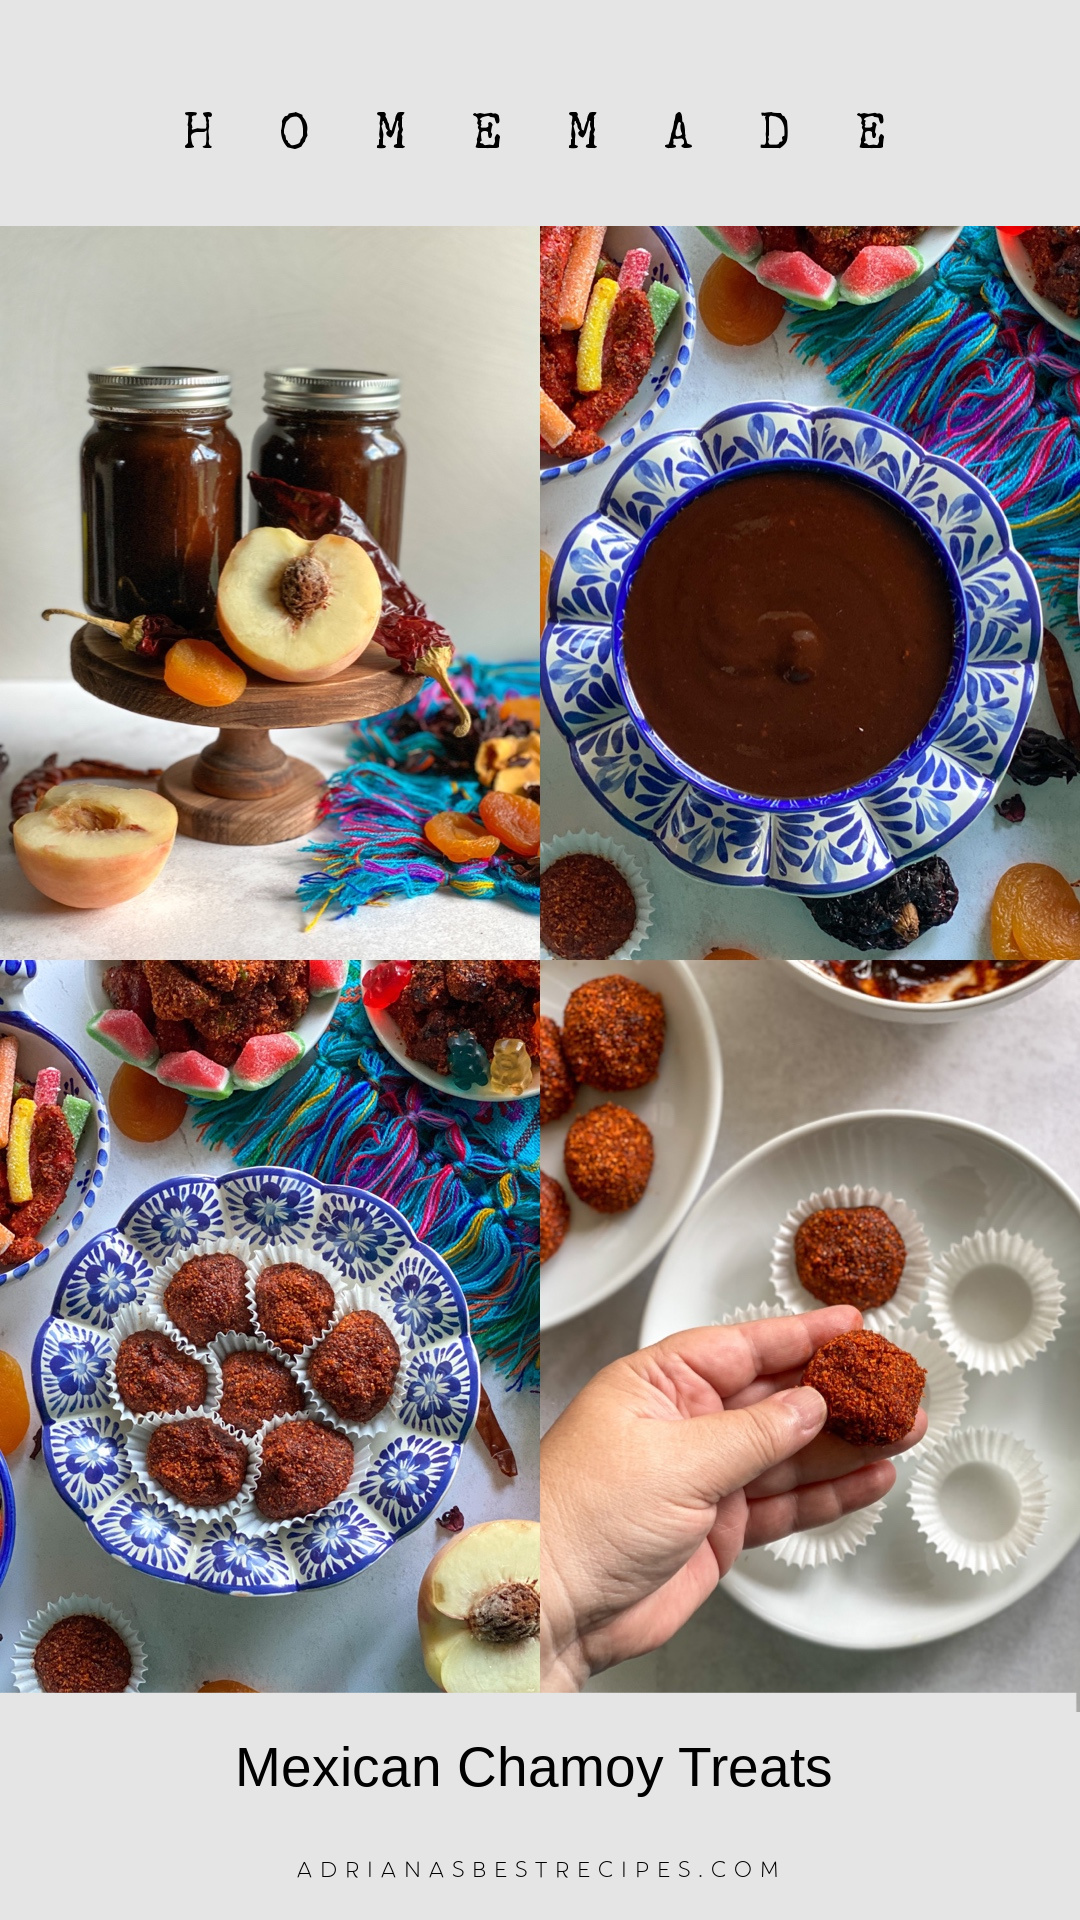 a collage with artisanal Mexican spicy treats inspired by umeboshi sour apricots flavor notes